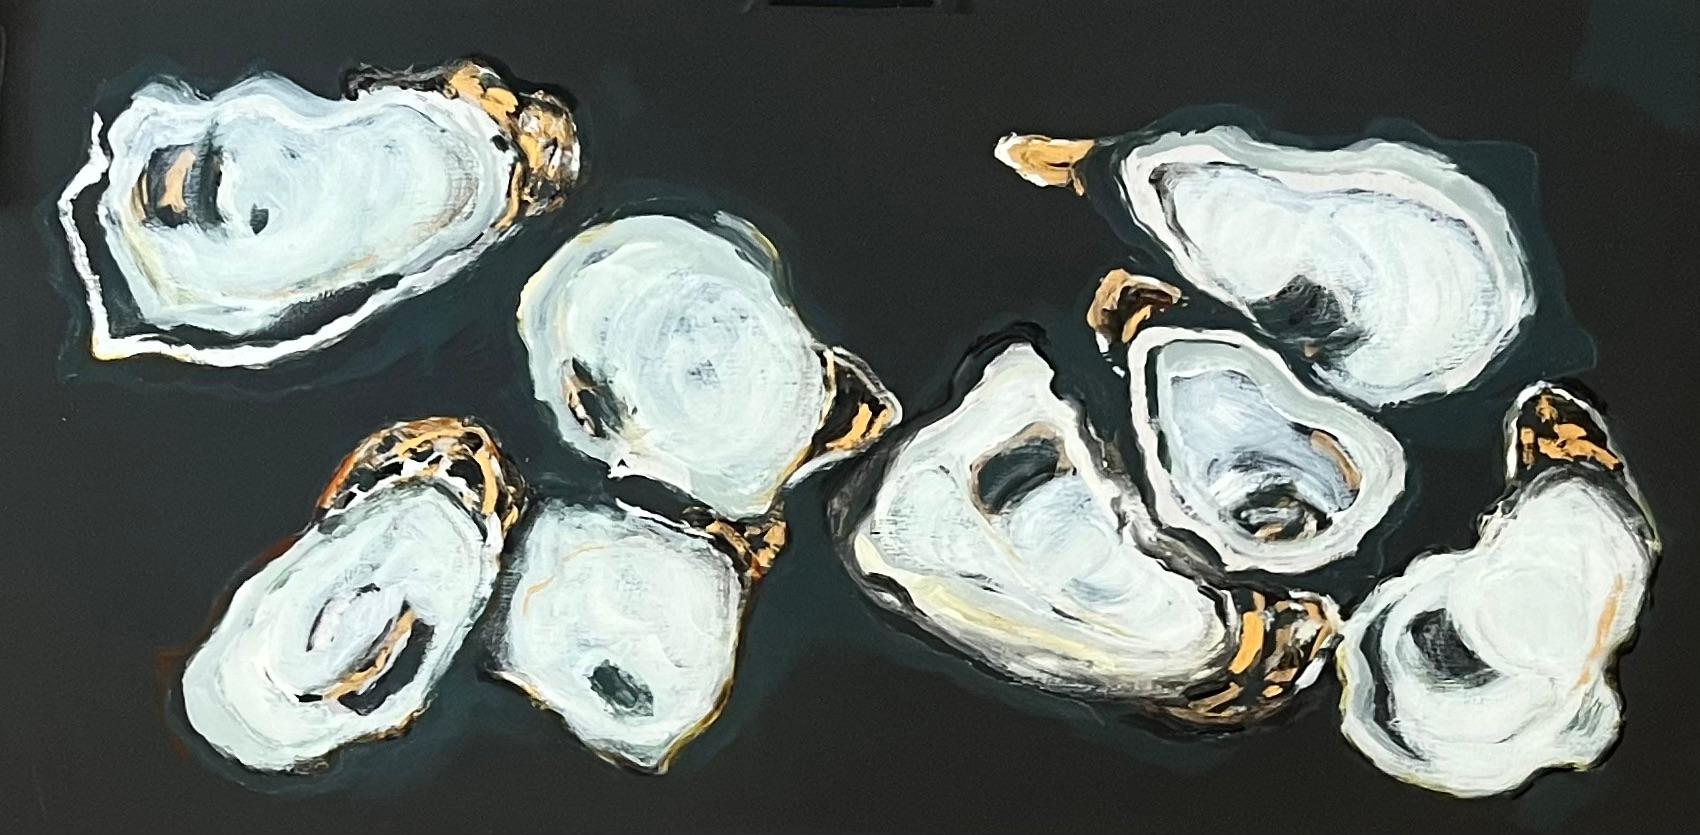 Anne Harney Still-Life Painting - "8 Oysters" abstract mixed media painting of oysters in black, white and gold